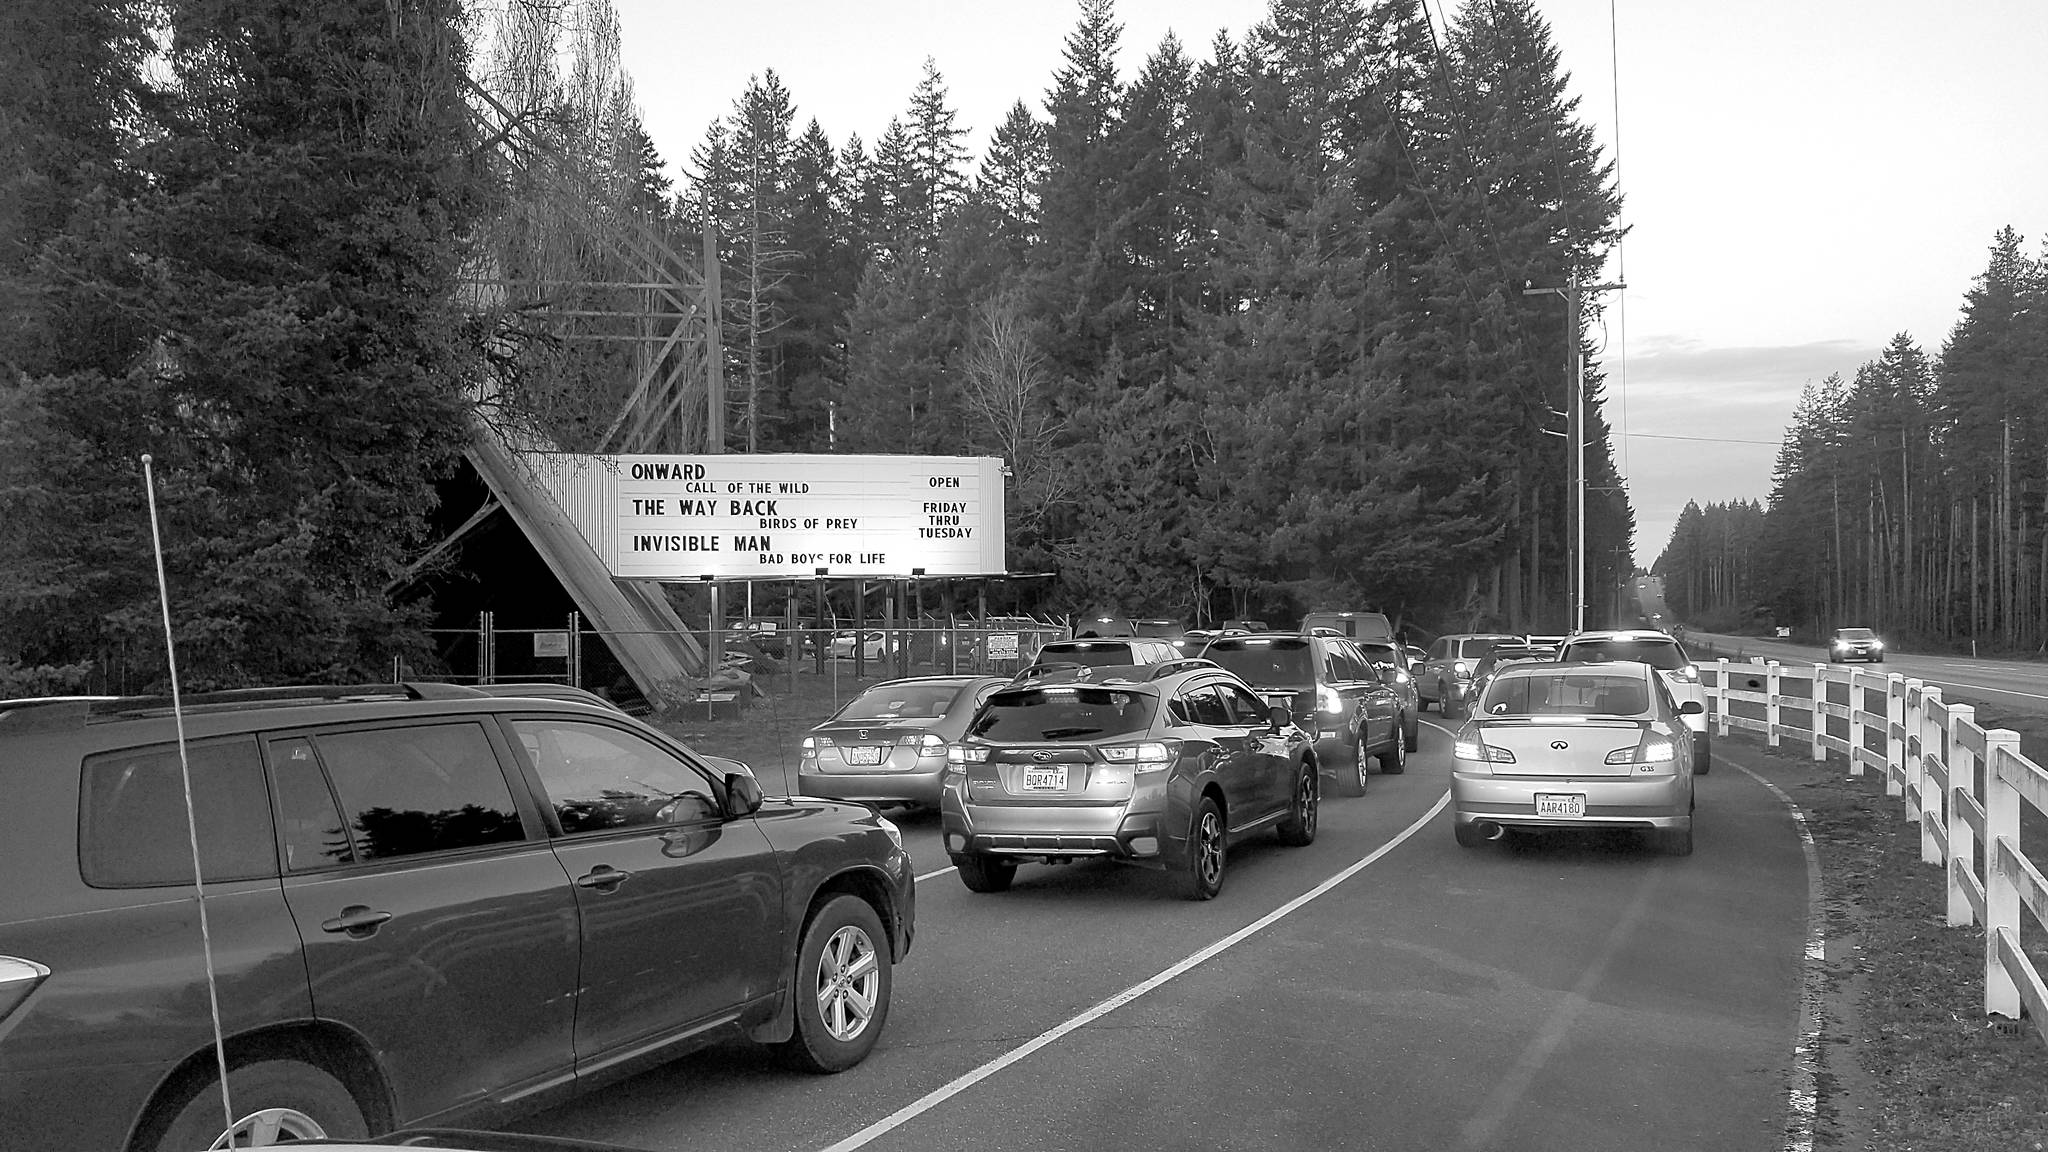 Silver screen escapism: It’s once again showtime at Kitsap County’s sole drive-in theater